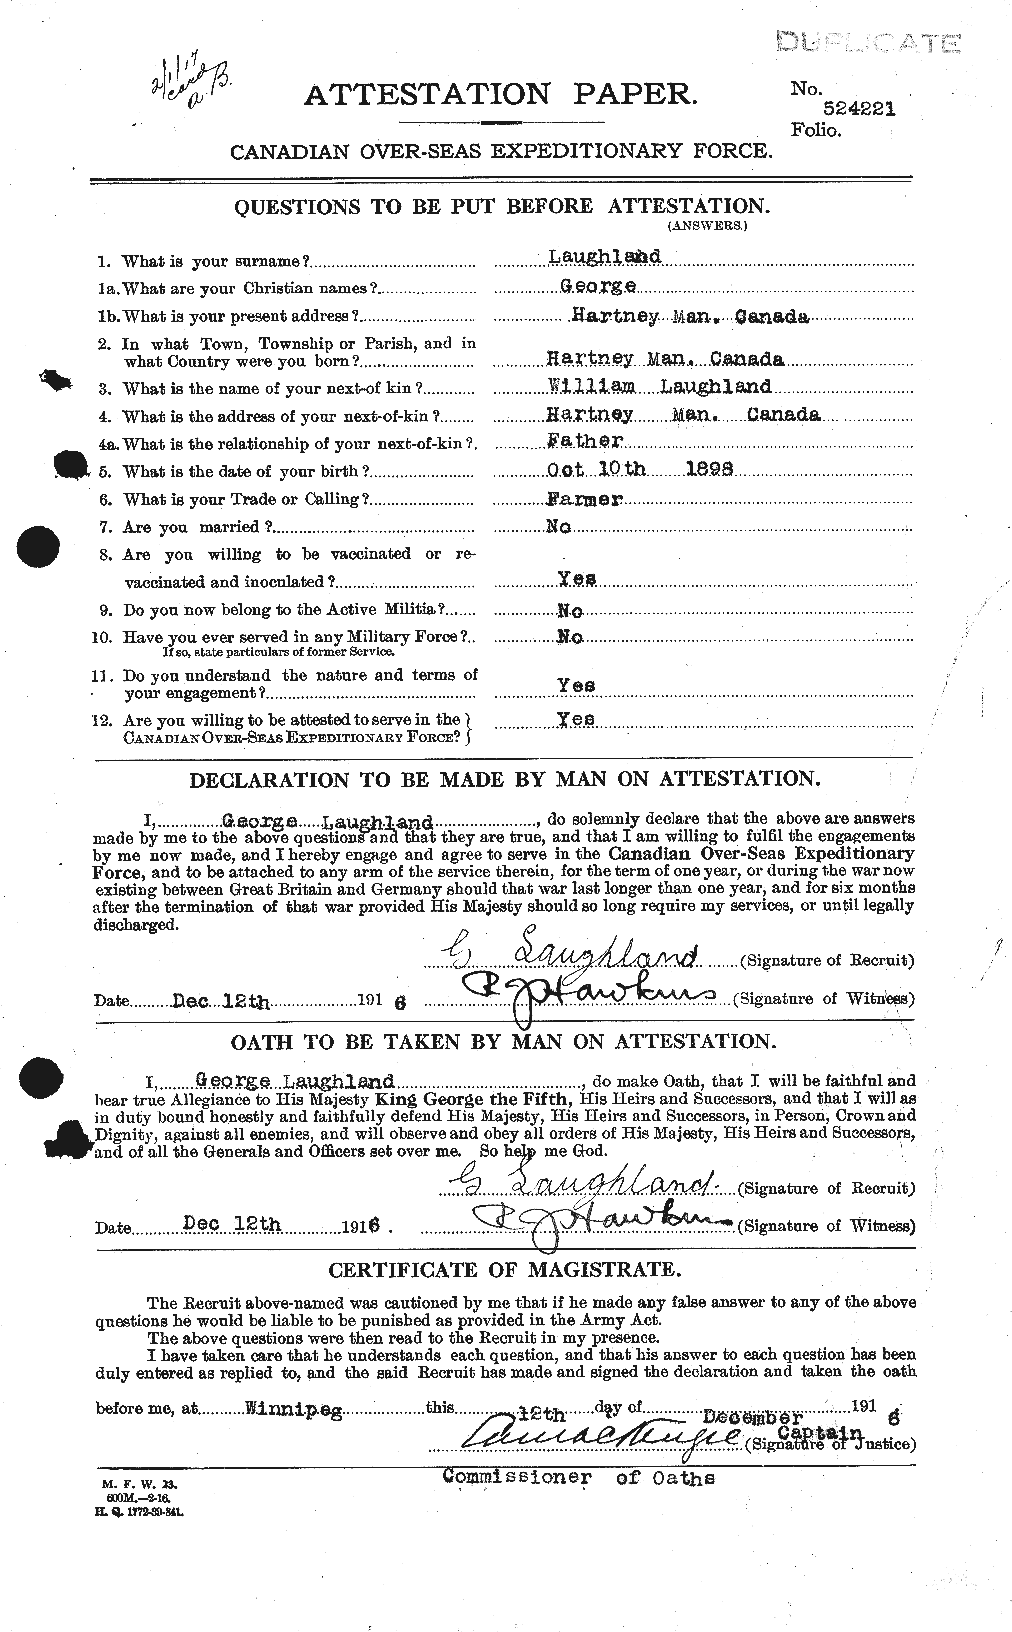 Personnel Records of the First World War - CEF 450541a